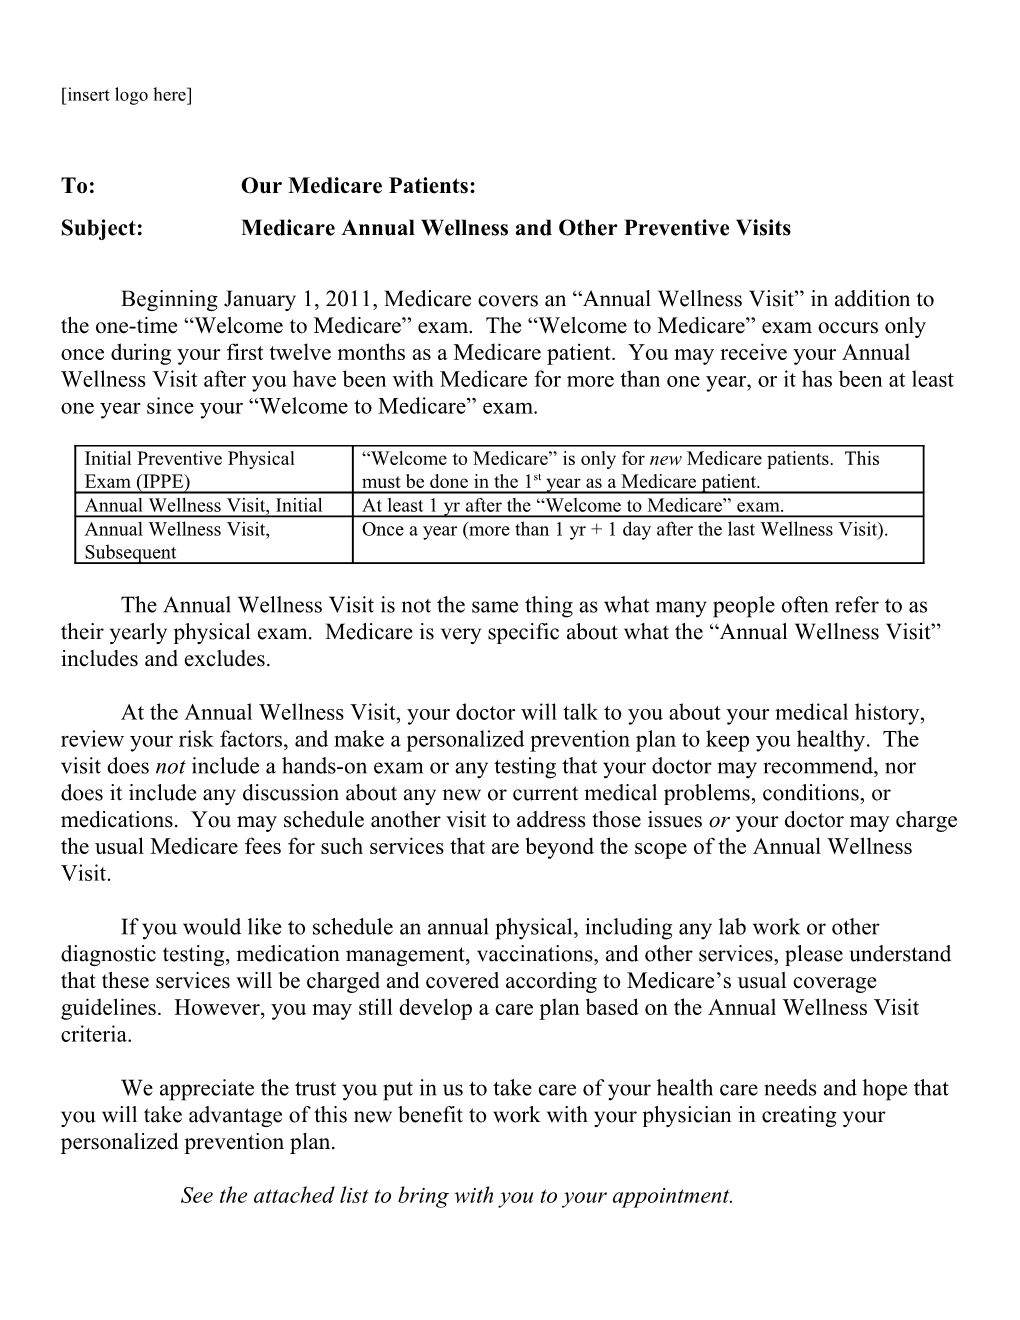 Subject: Medicare Annual Wellness and Other Preventive Visits